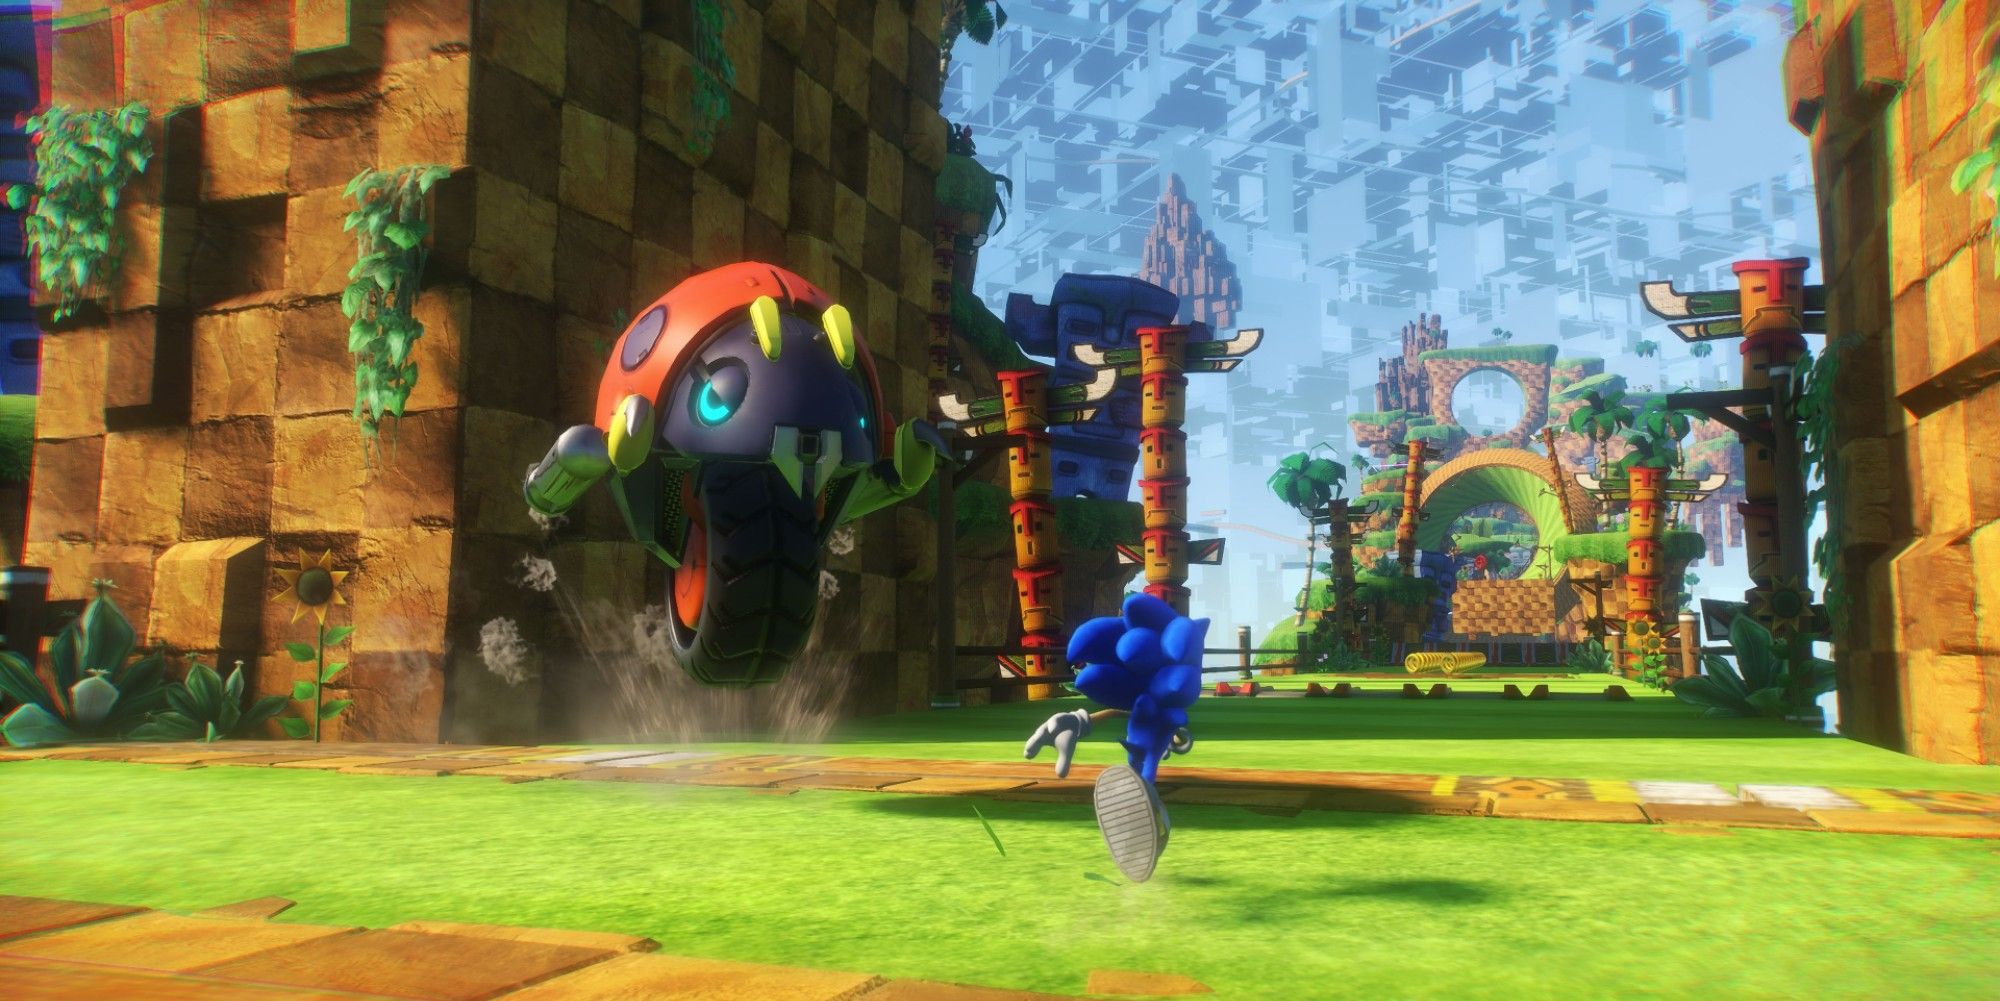 I really wish Sonic Frontiers had these modded physics